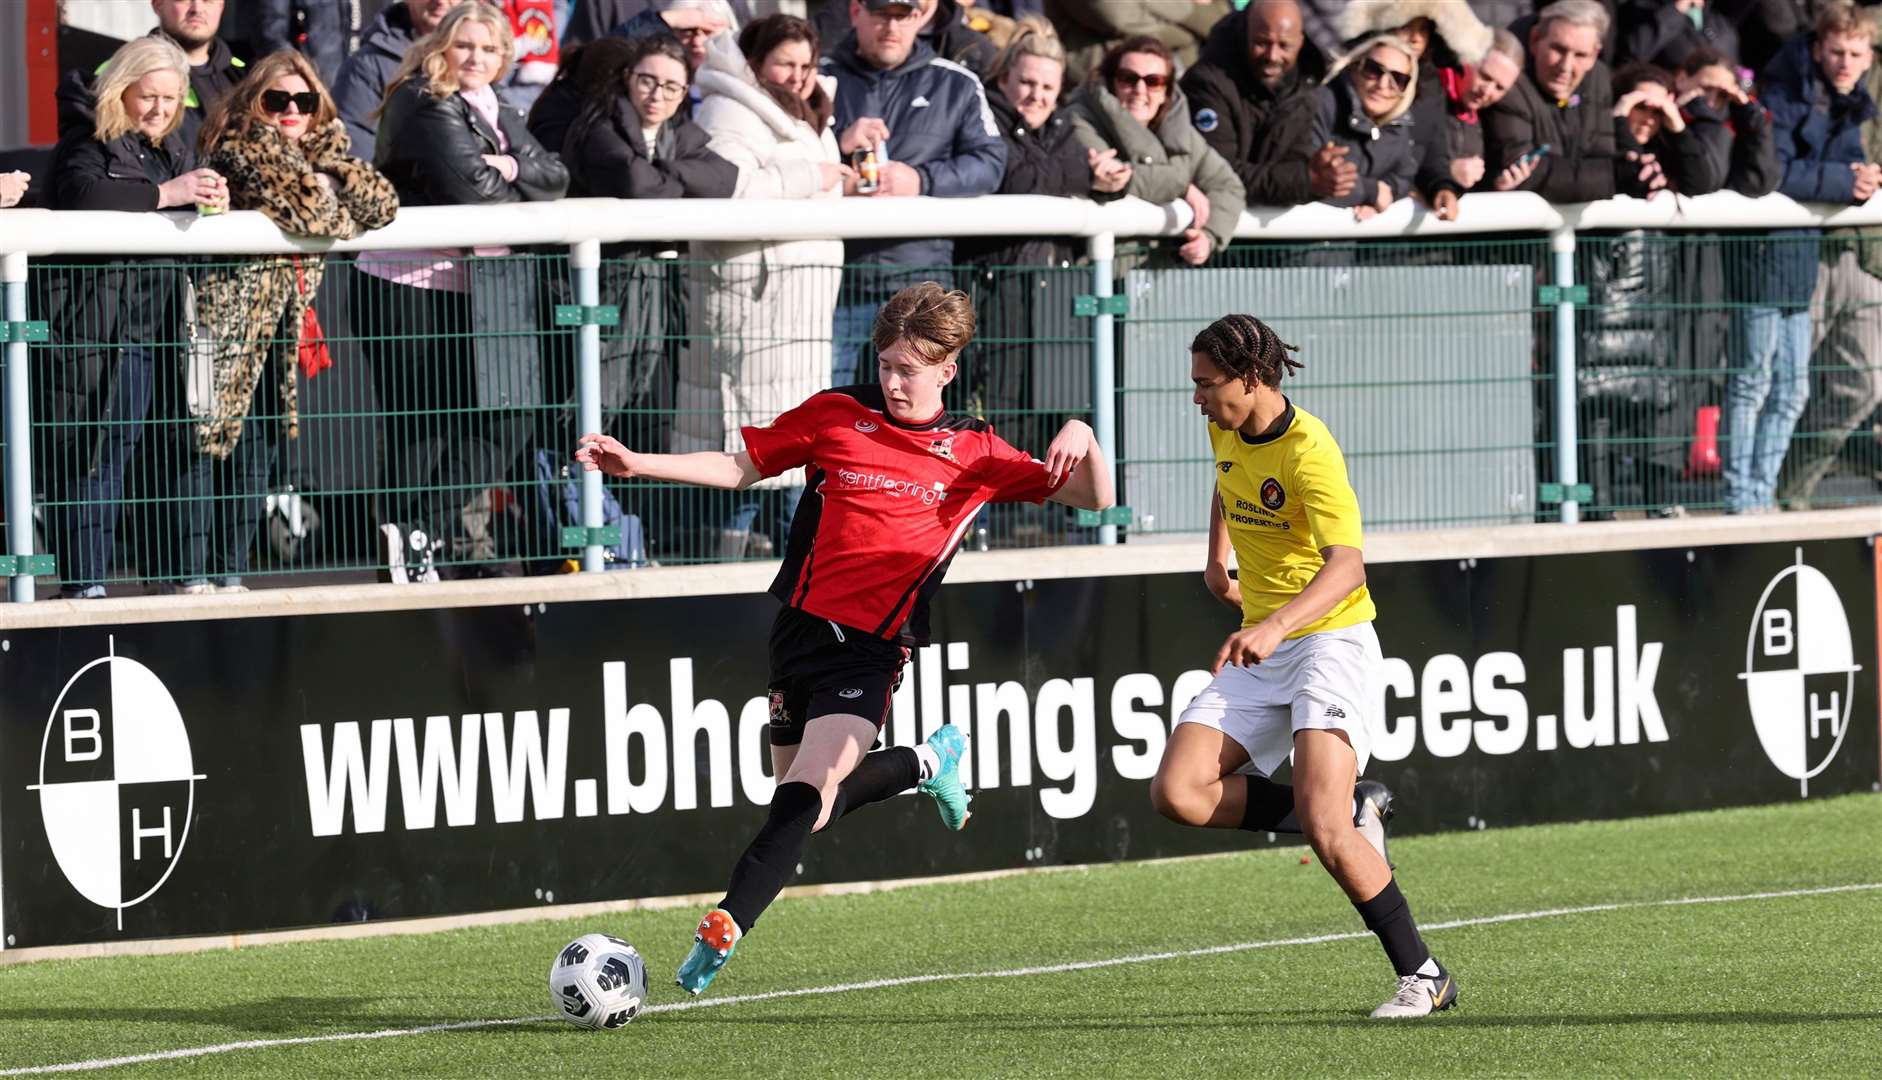 The crowd look on as Rochester under-15s (red) look to advance against Ebbsfleet on Sunday. Picture: PSP Images